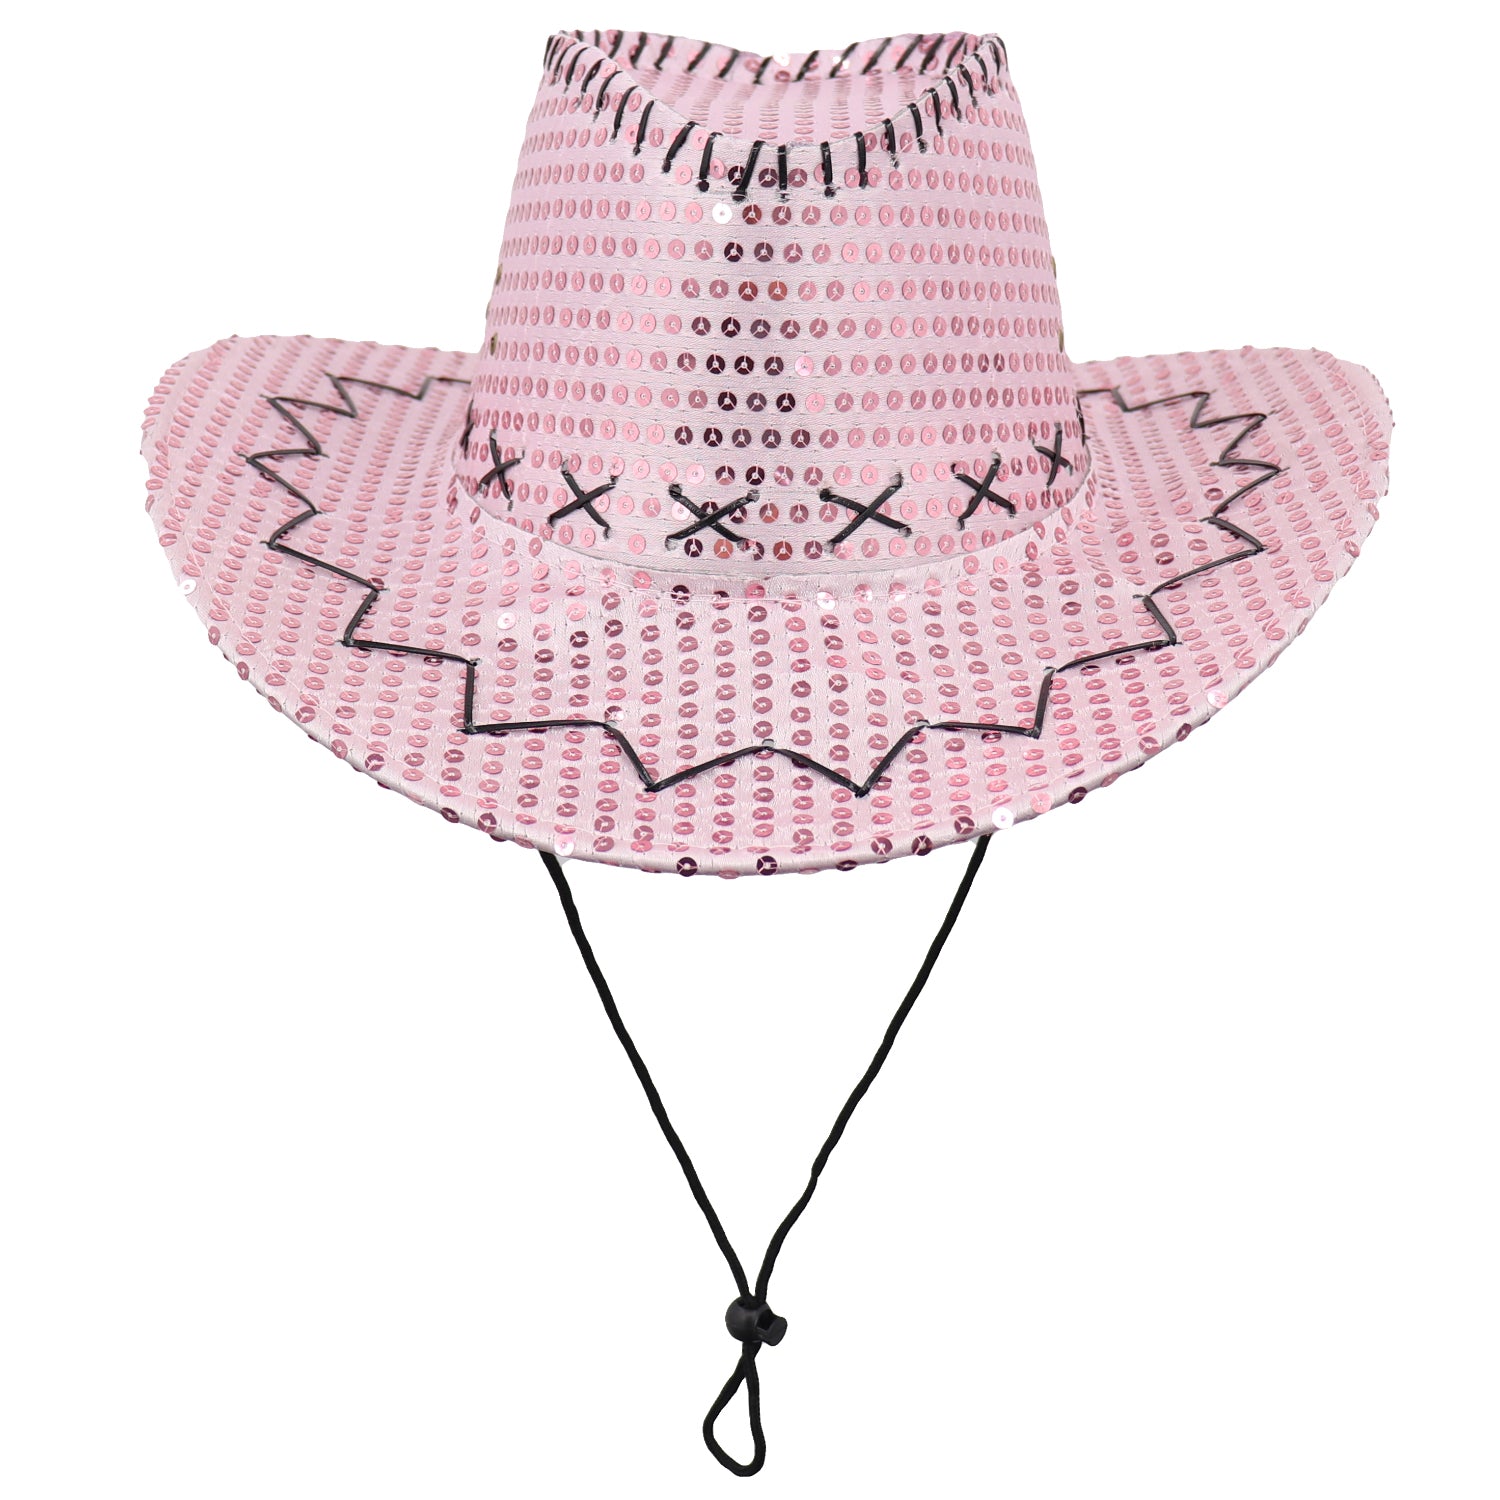 Sequin Cowboy Hat Glitter Cap Western Trilby Shiny Cowgirl Dress Up Party Wear, Light Pink